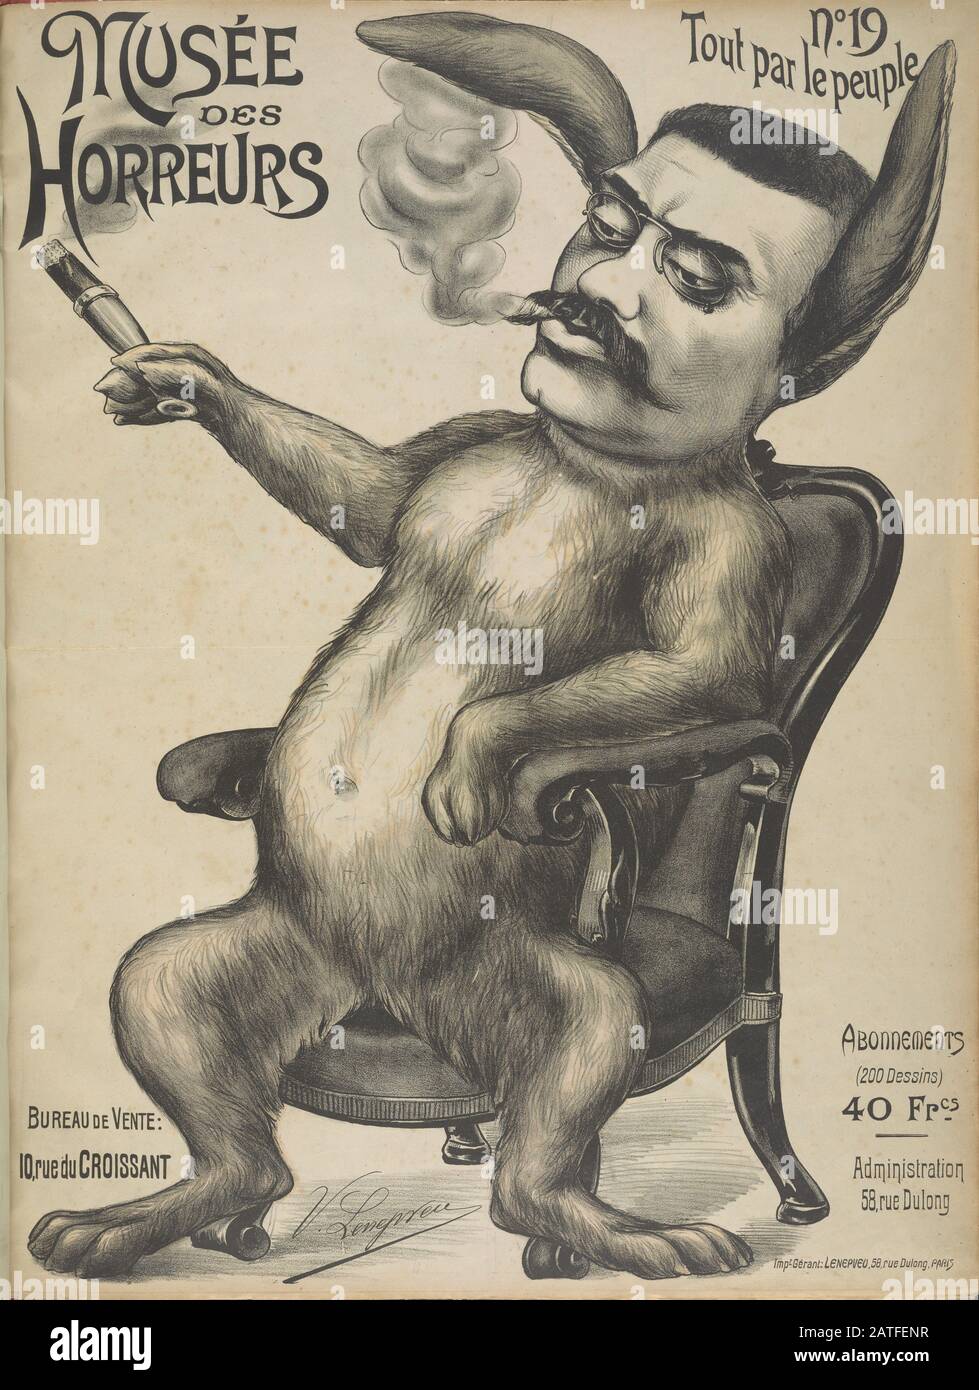 Musée des Horreurs -  No. 19 Tout par le peuple  -  1899  -  Lenepveu, V.  -  Caricature of Alexandre Millerand (1859-1943) as a dog (or rabbit?) smoking a cigar. Millerand was a socialist politician, editor of La Petite Republique, and later Prime Minister (1920) and President of France (1920-1924). During the Dreyfus Affair, Millerand served as Minister of Commerce in Waldeck-Rousseau's cabinet, which supported Dreyfus. Hand colored. Stock Photo